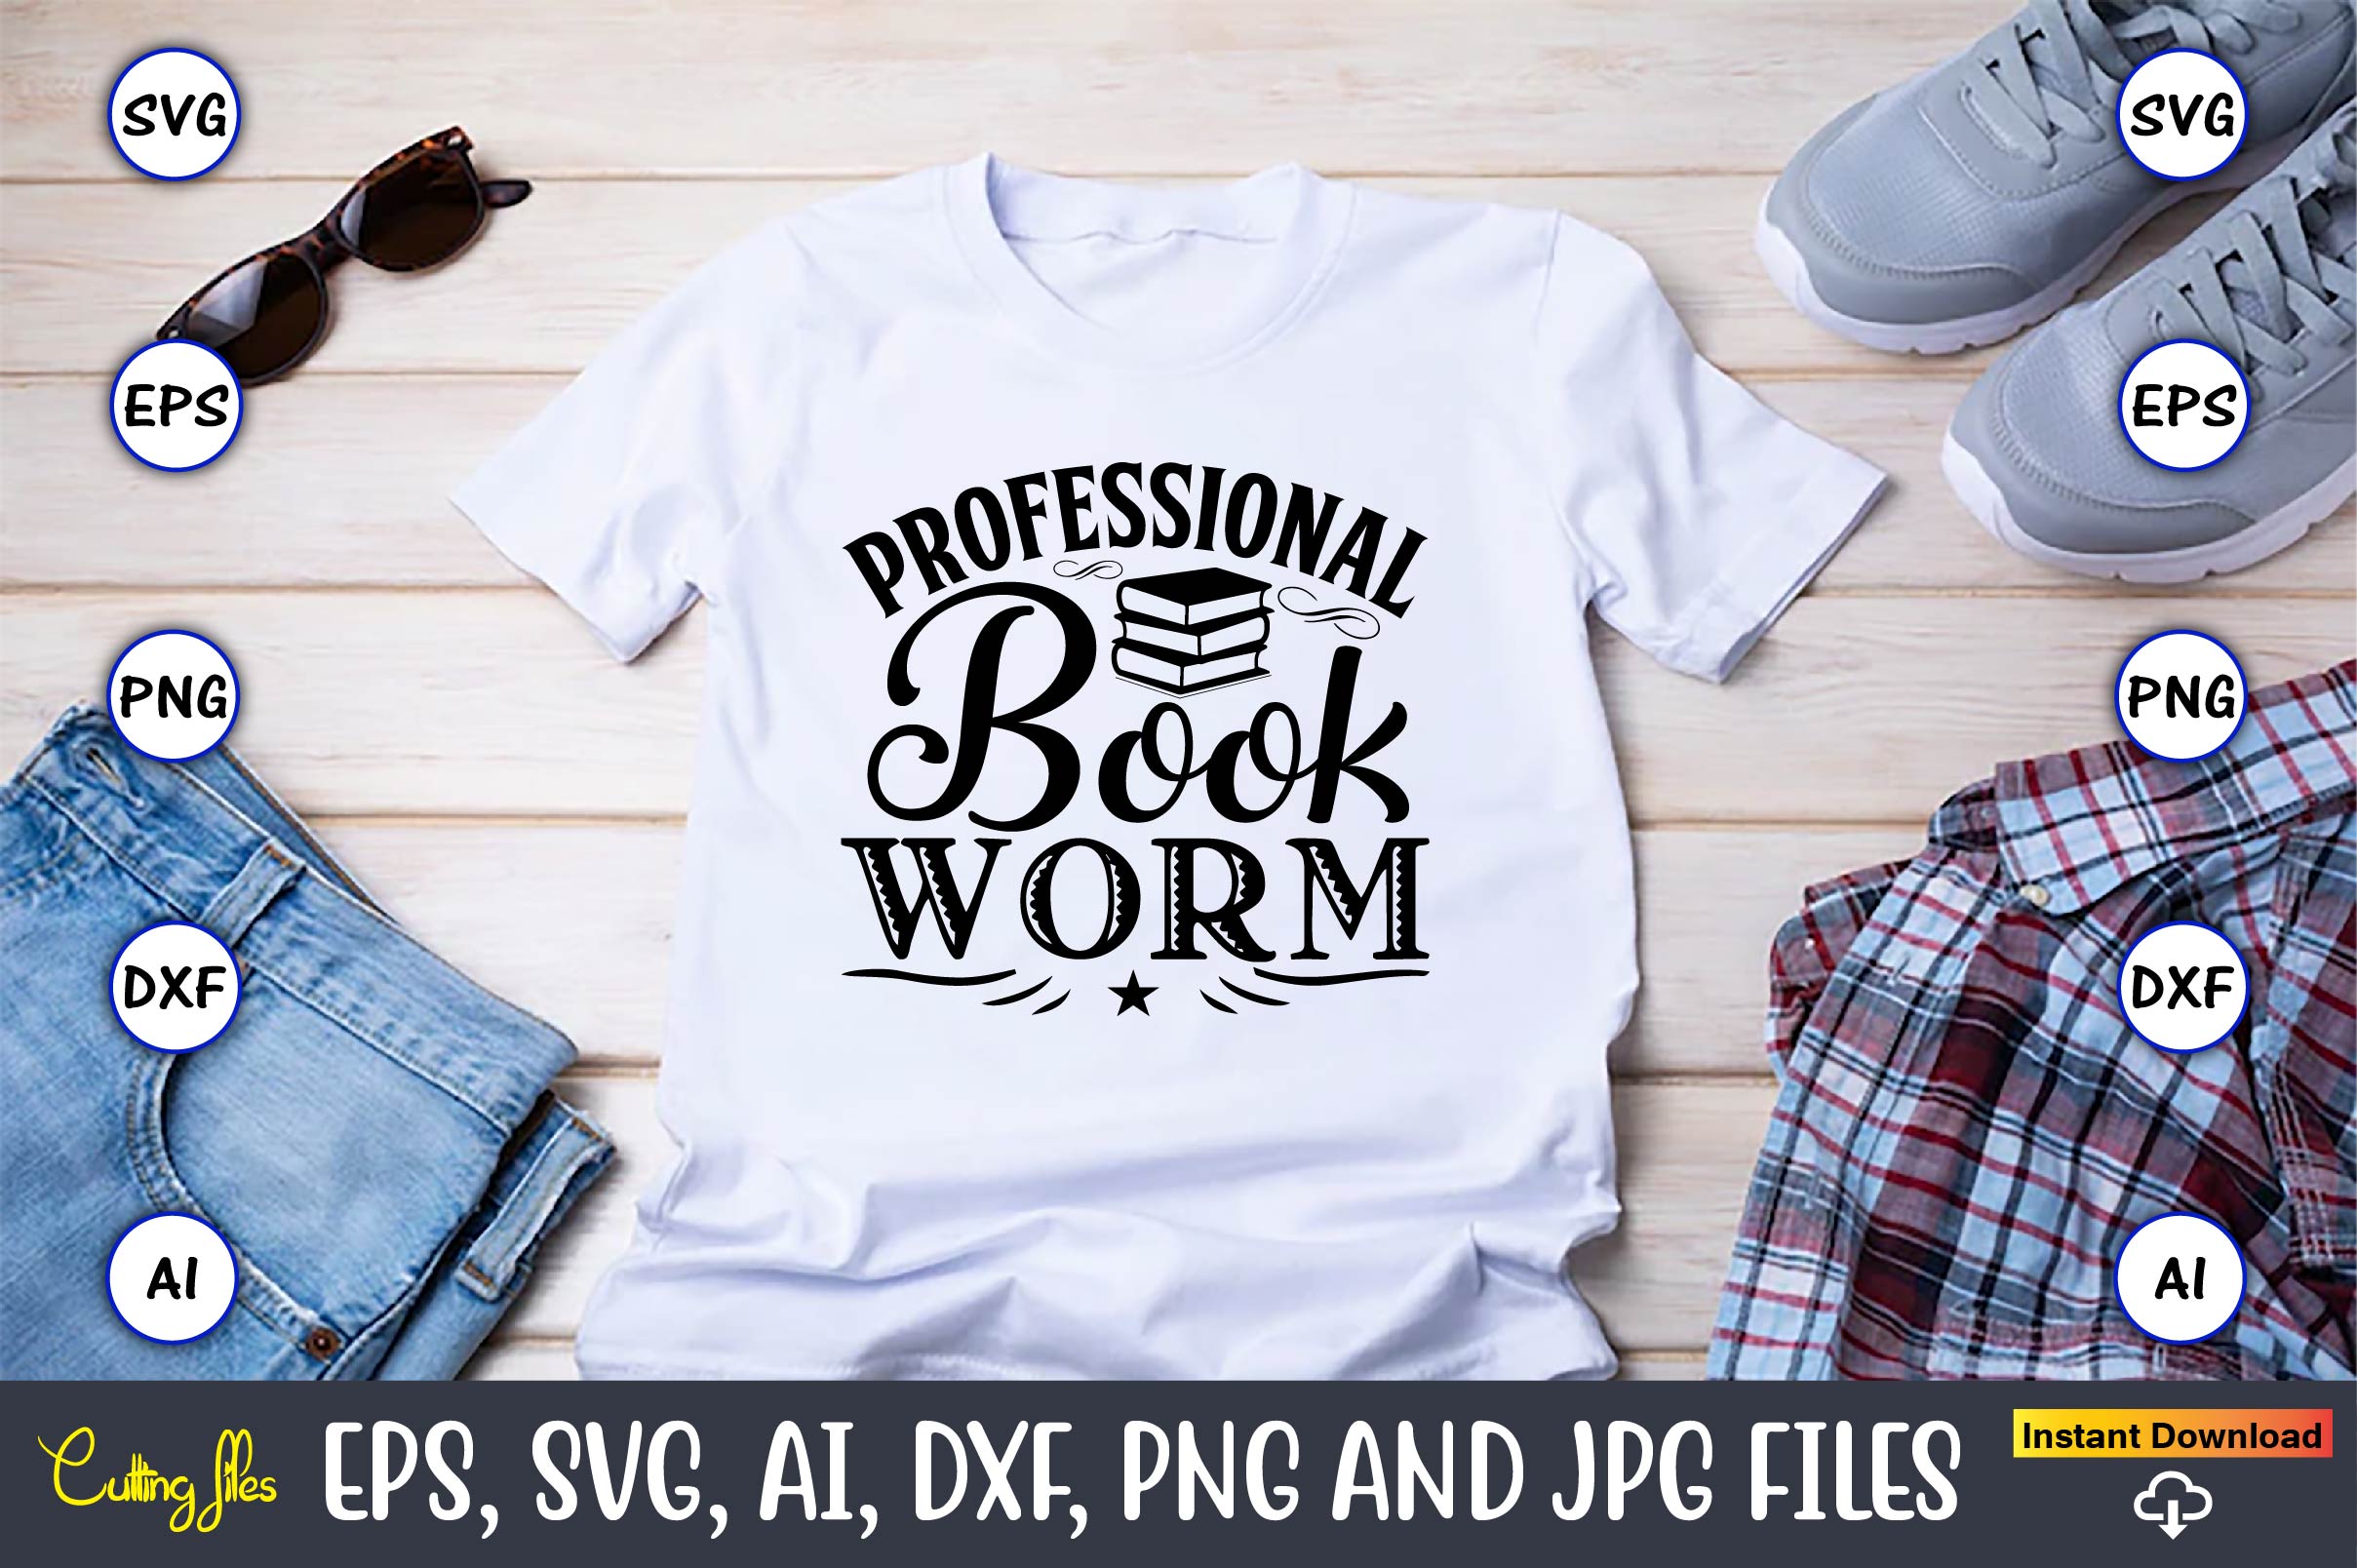 Image of a white t-shirt with an amazing inscription Professional bookworm.